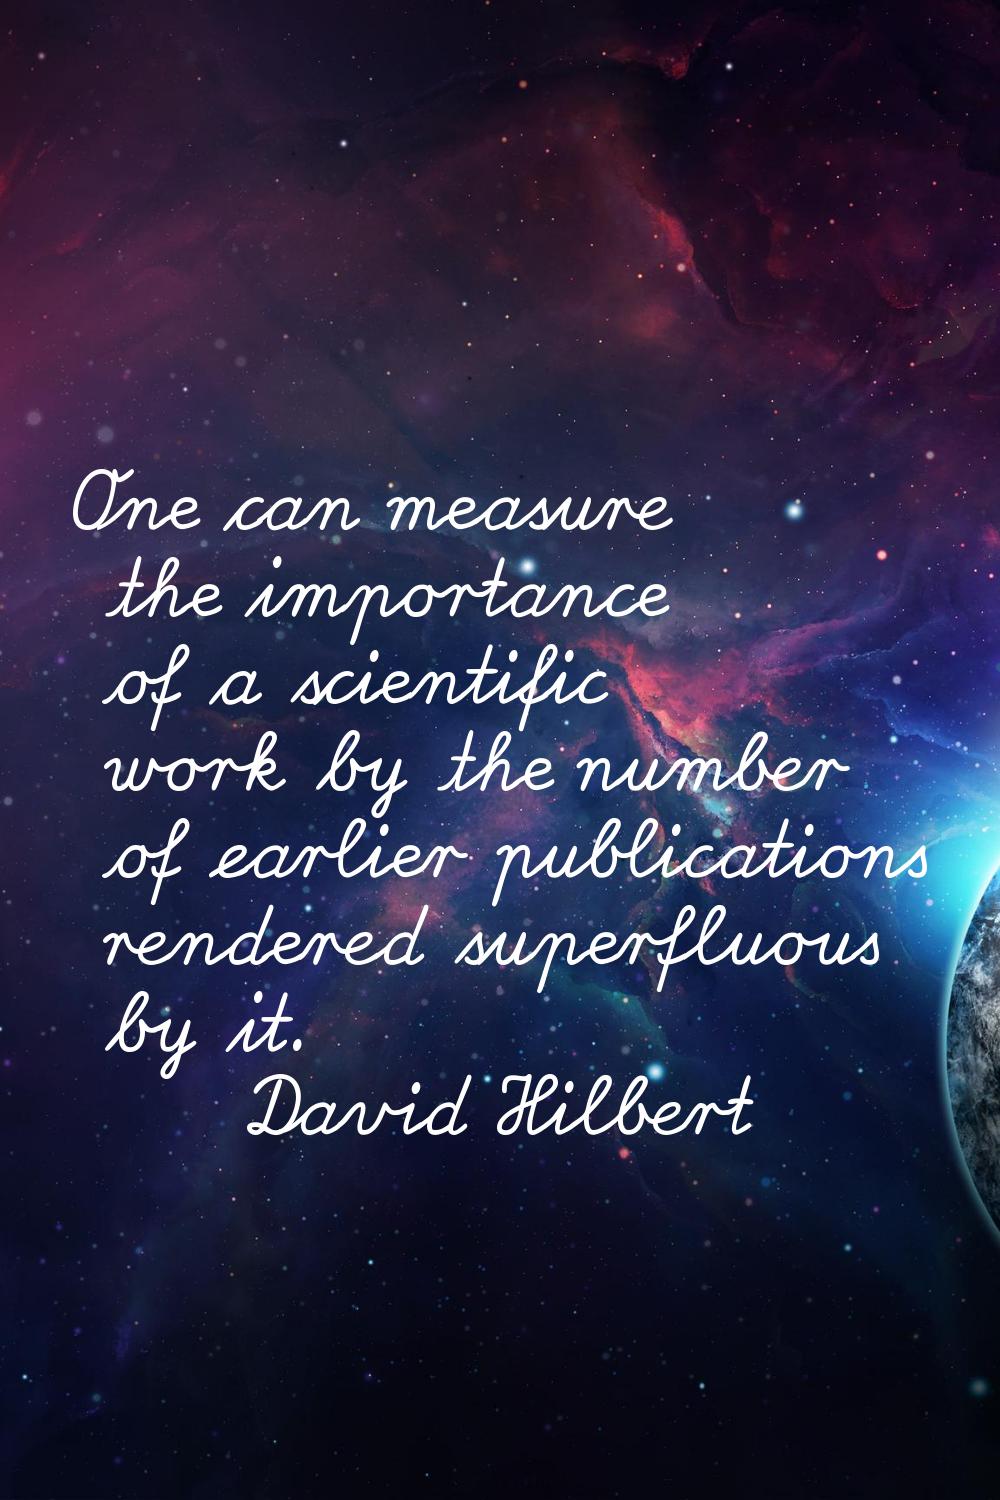 One can measure the importance of a scientific work by the number of earlier publications rendered 